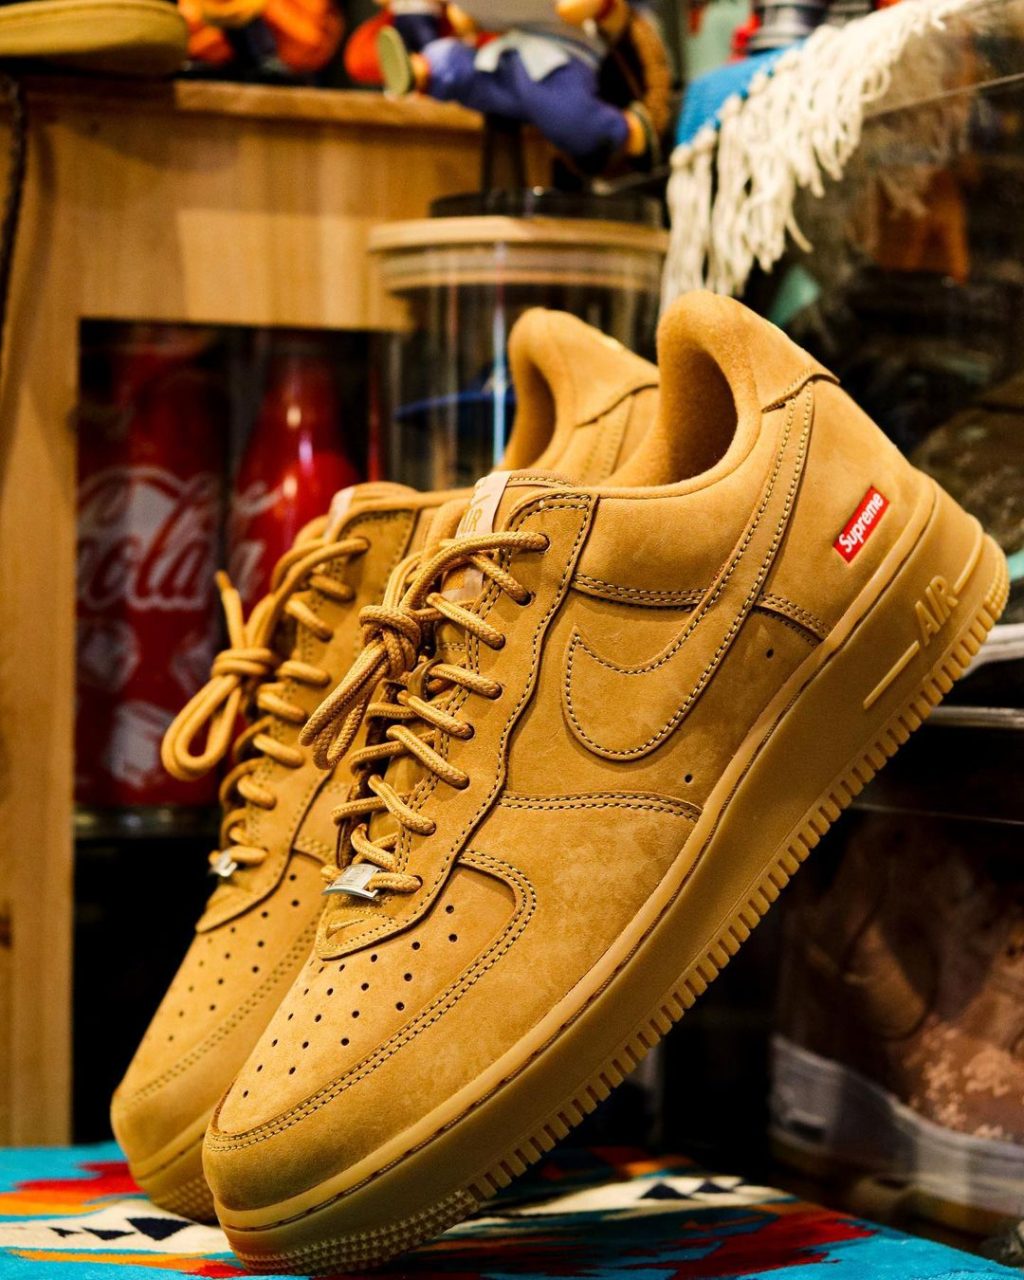 supreme-nike-air-force-1-low-flax-release-2021